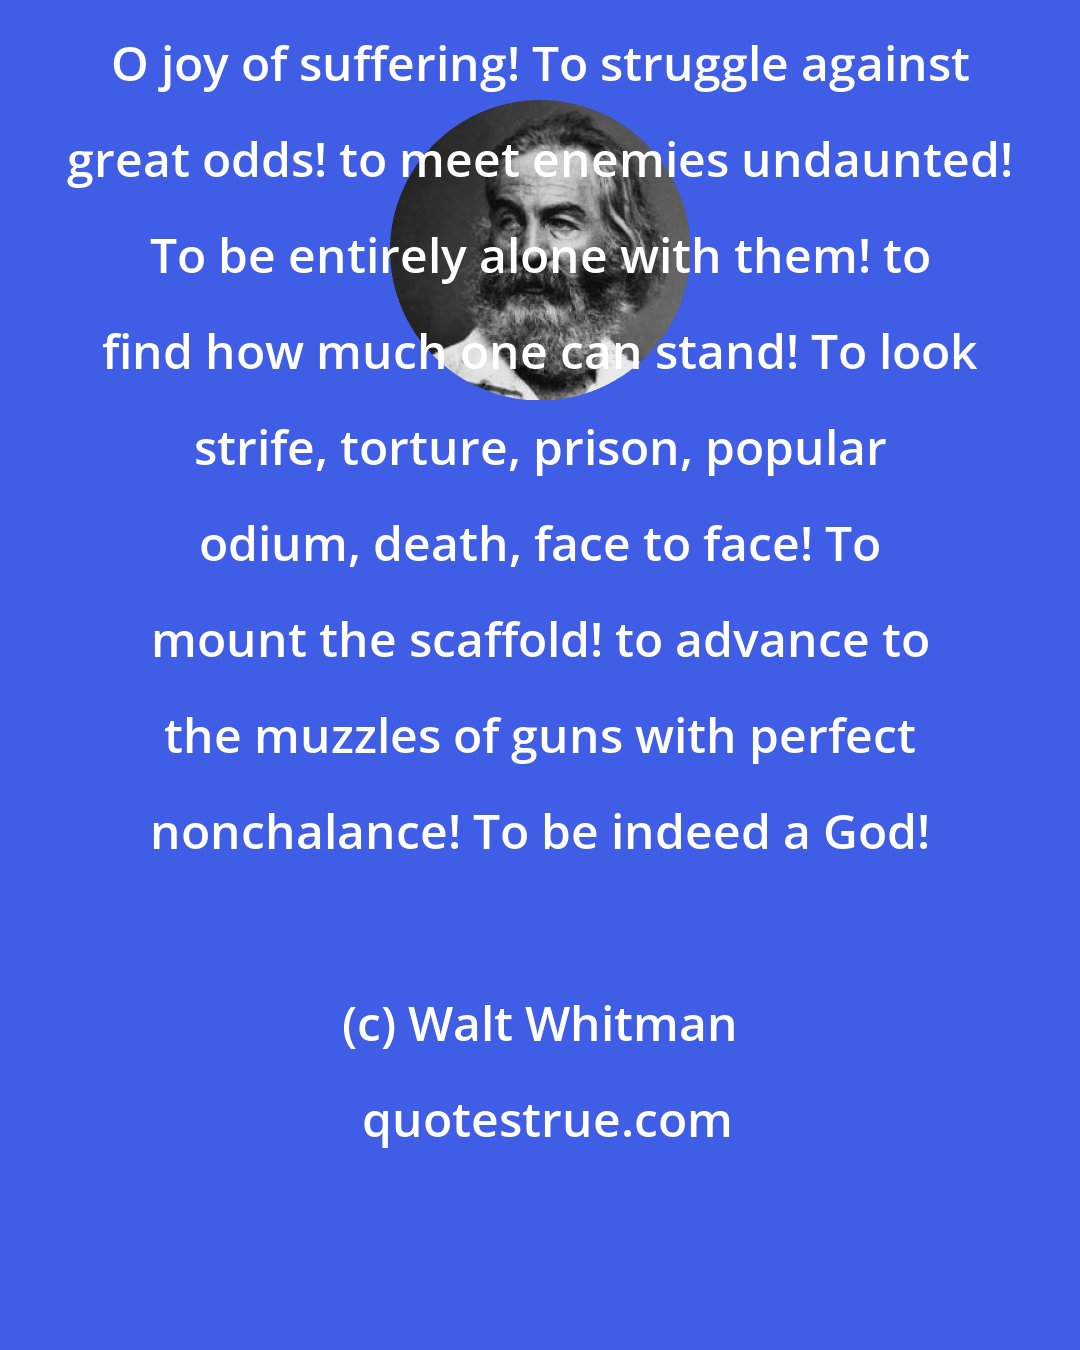 Walt Whitman: O joy of suffering! To struggle against great odds! to meet enemies undaunted! To be entirely alone with them! to find how much one can stand! To look strife, torture, prison, popular odium, death, face to face! To mount the scaffold! to advance to the muzzles of guns with perfect nonchalance! To be indeed a God!